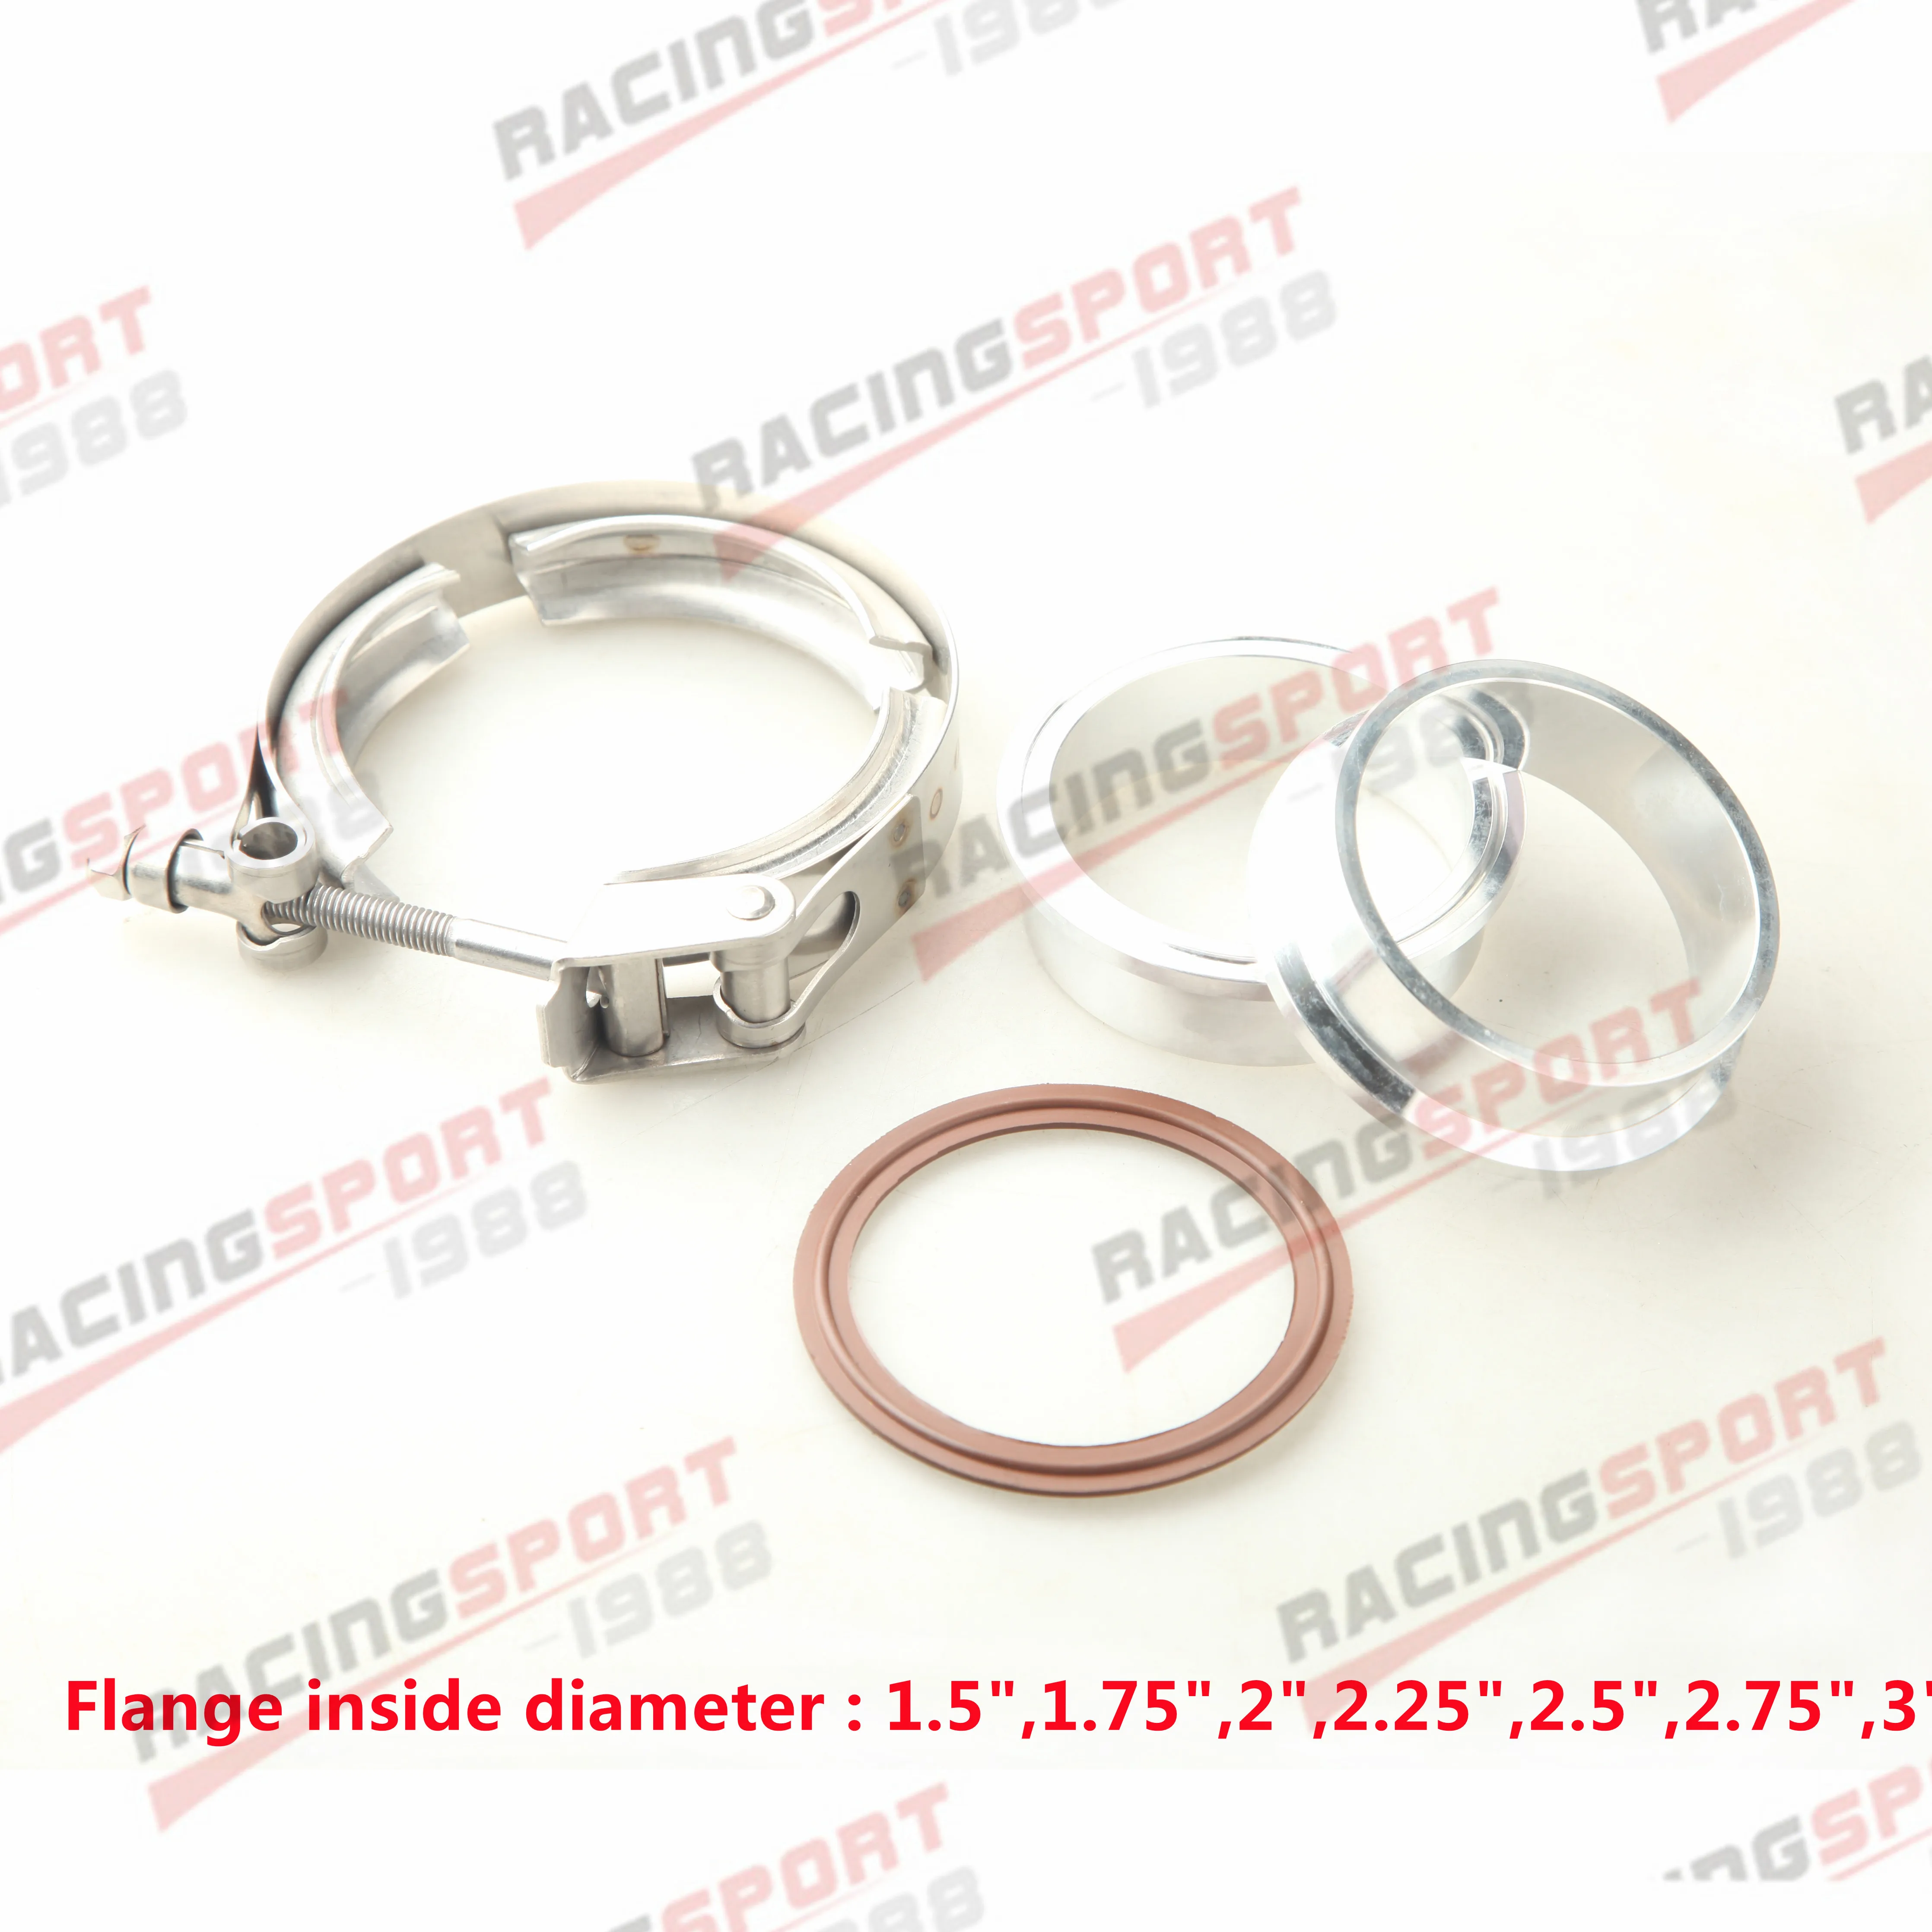 

1.5", 1.75", 2", 2.25", 2.5", 2.75", 3" SS V-Band Quick Release Clamp & Aluminum Flange Turbo Exhaust Downpipe